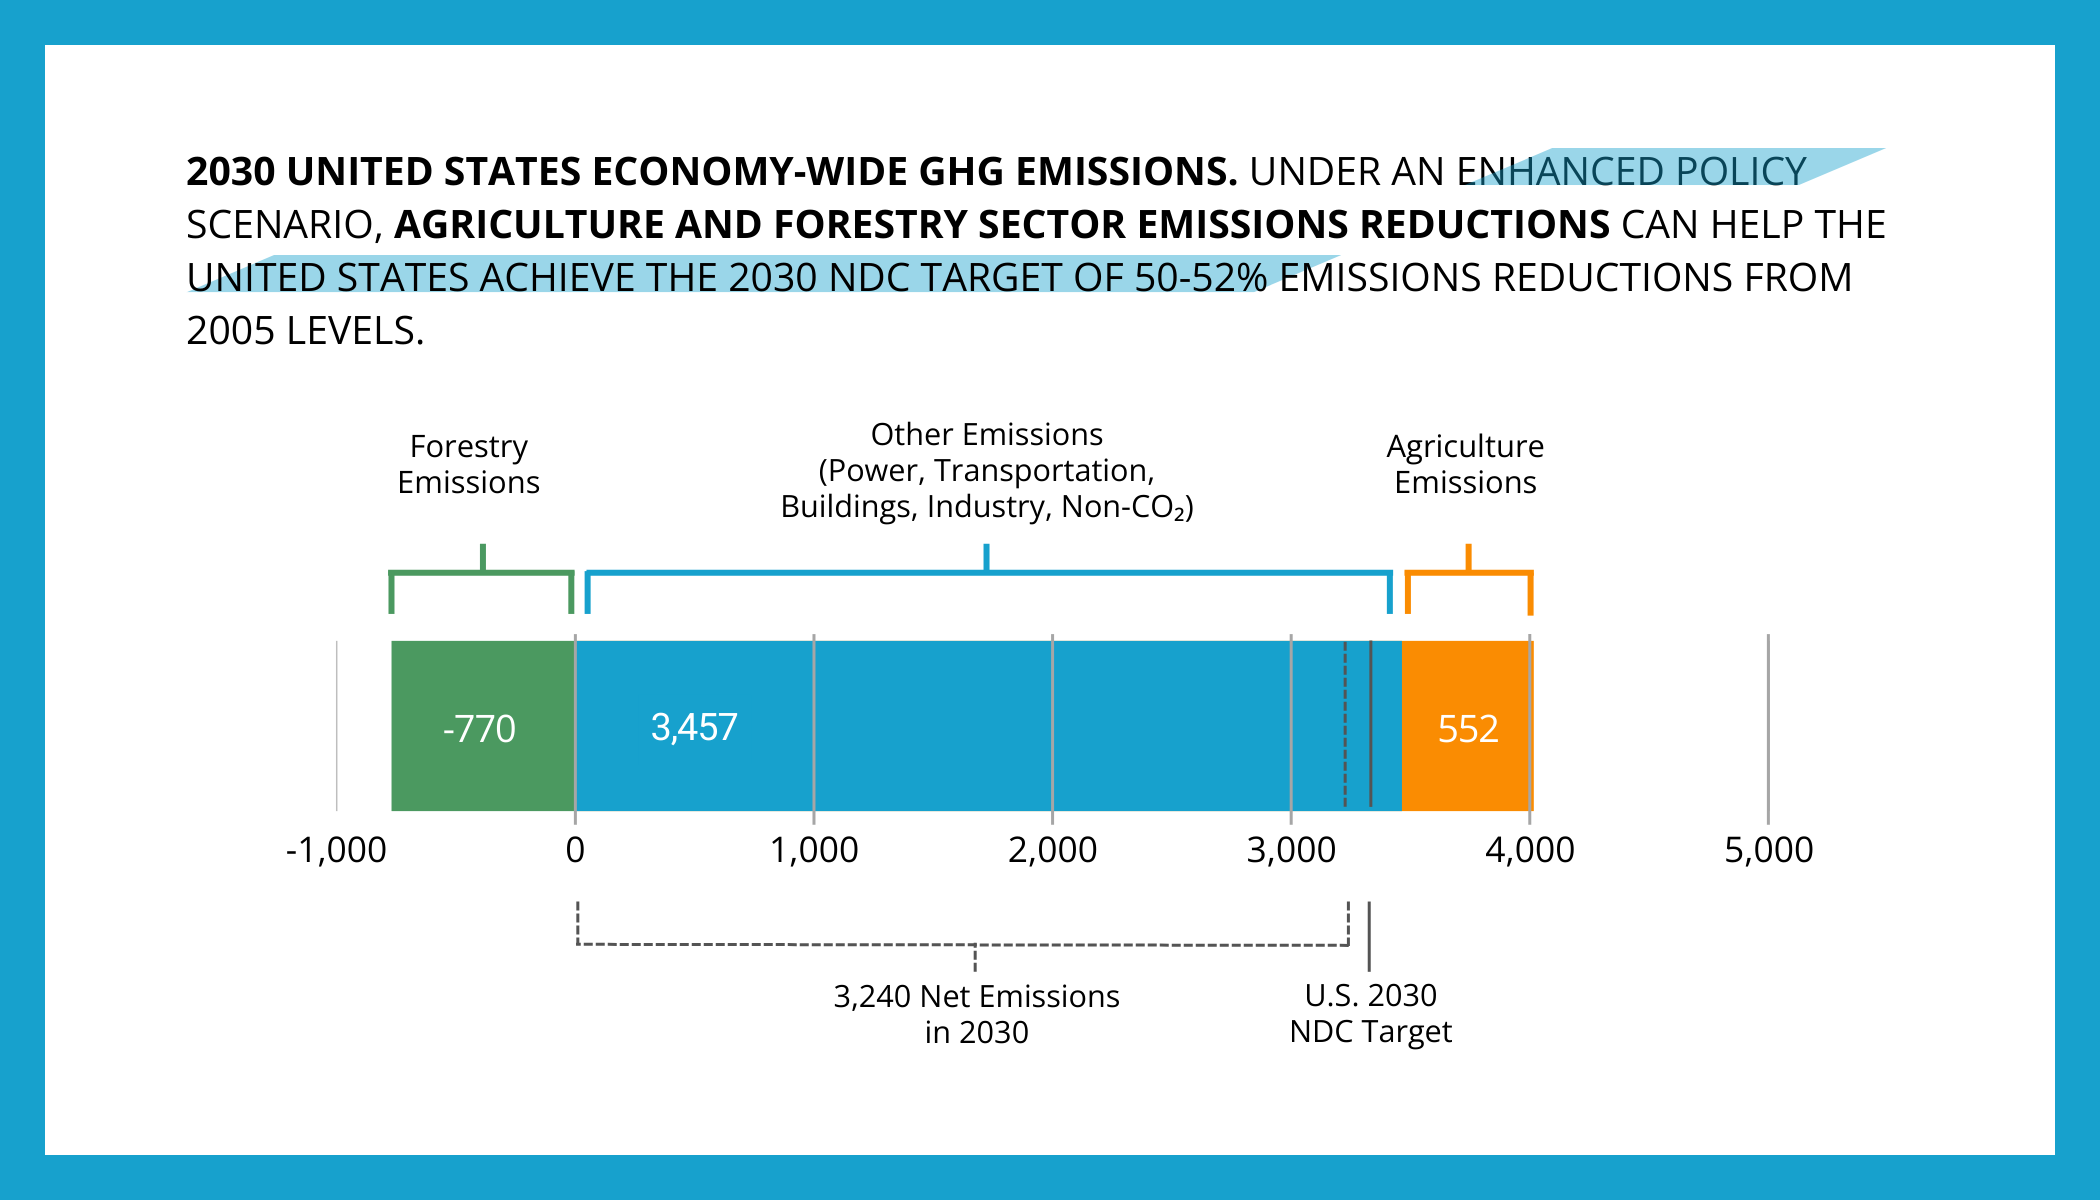 2030 United States greenhouse gas emissions (MtCO₂e/y) after reductions, featuring the role of agriculture and forestry sector emissions reductions, under an enhanced policy scenario, in helping the United States achieve the 2030 NDC target of 50-52% emissions reductions from 2005 levels by 2030.